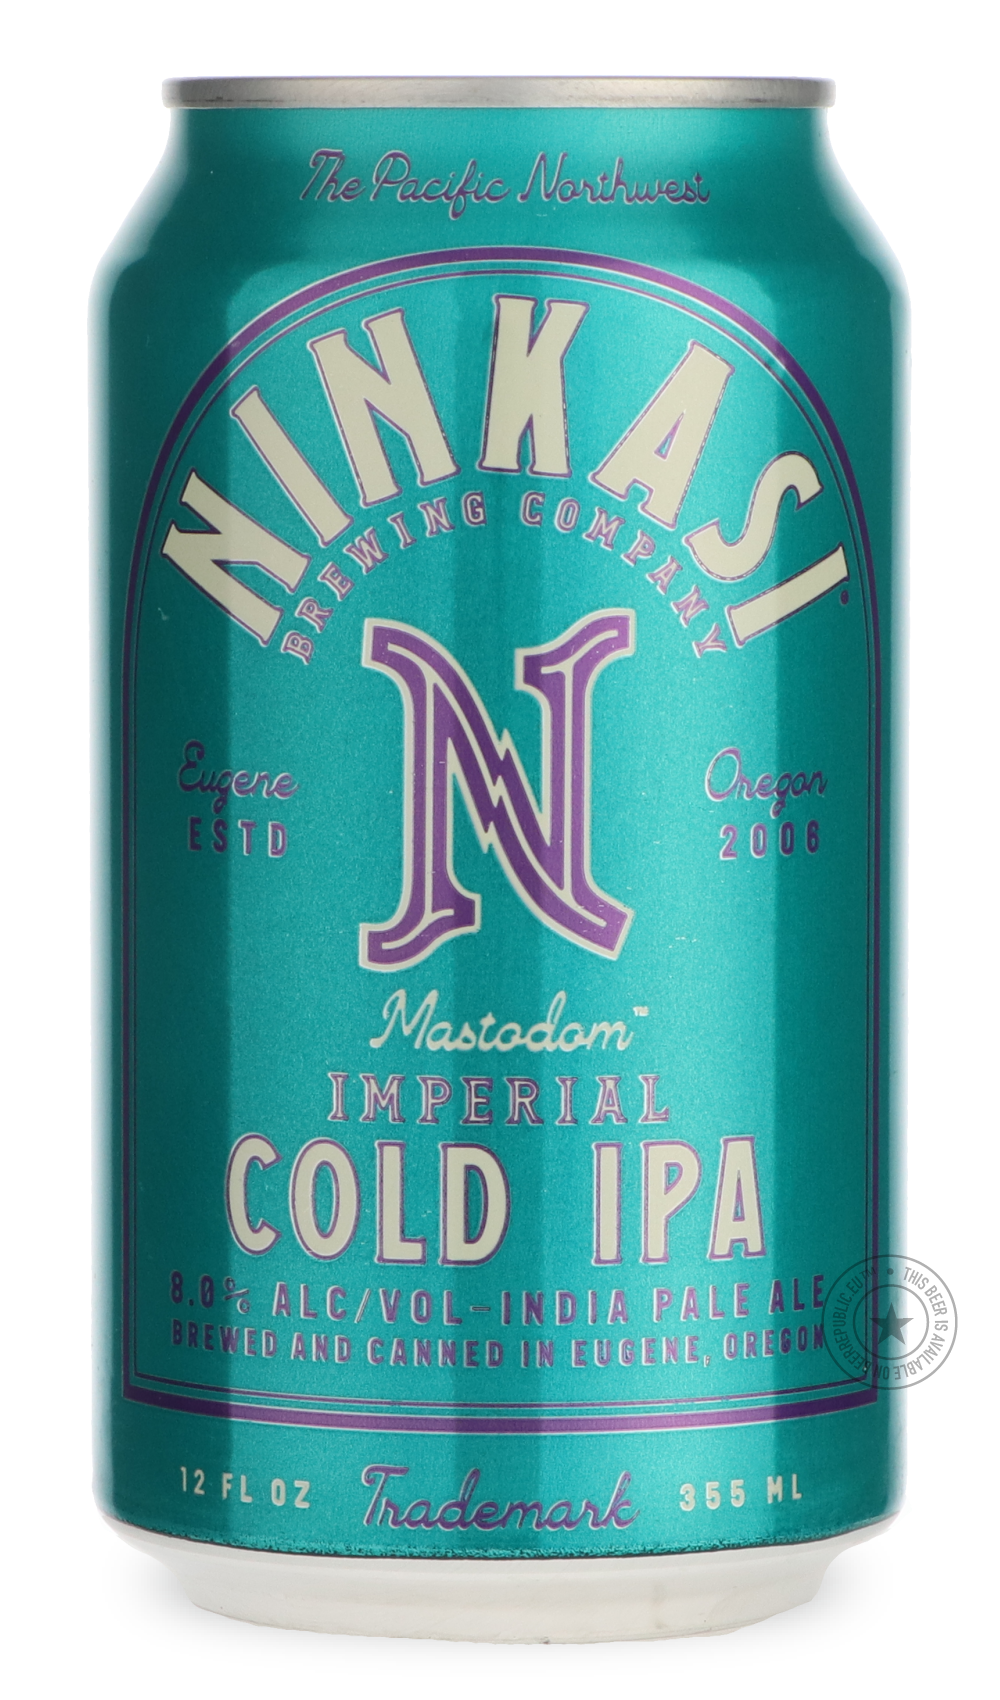 -Ninkasi- Mastodom-IPA- Only @ Beer Republic - The best online beer store for American & Canadian craft beer - Buy beer online from the USA and Canada - Bier online kopen - Amerikaans bier kopen - Craft beer store - Craft beer kopen - Amerikanisch bier kaufen - Bier online kaufen - Acheter biere online - IPA - Stout - Porter - New England IPA - Hazy IPA - Imperial Stout - Barrel Aged - Barrel Aged Imperial Stout - Brown - Dark beer - Blond - Blonde - Pilsner - Lager - Wheat - Weizen - Amber - Barley Wine - 